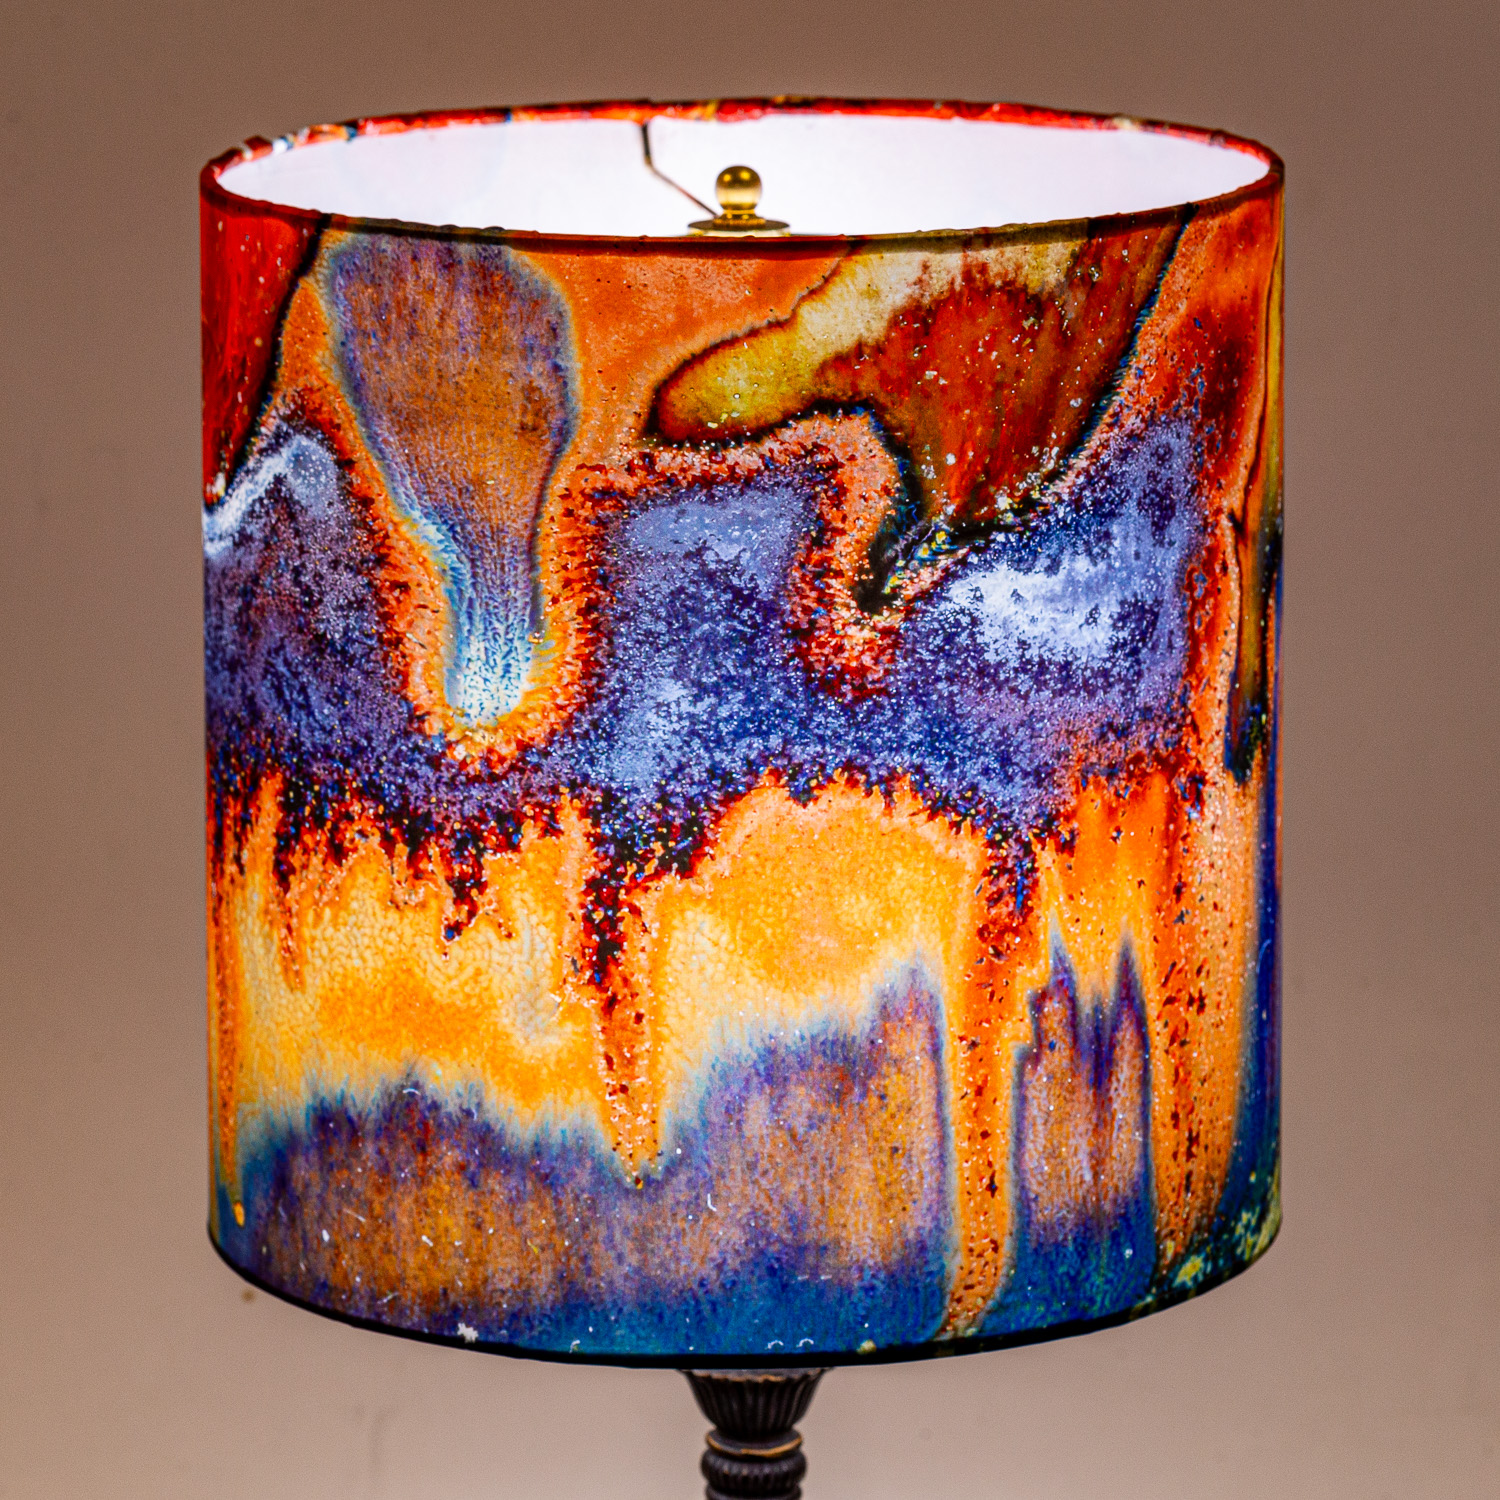 155: Closeup image of reduction-fired pottery by Scott Frankenberger  -- Photo on Lamp shade by David Elmore